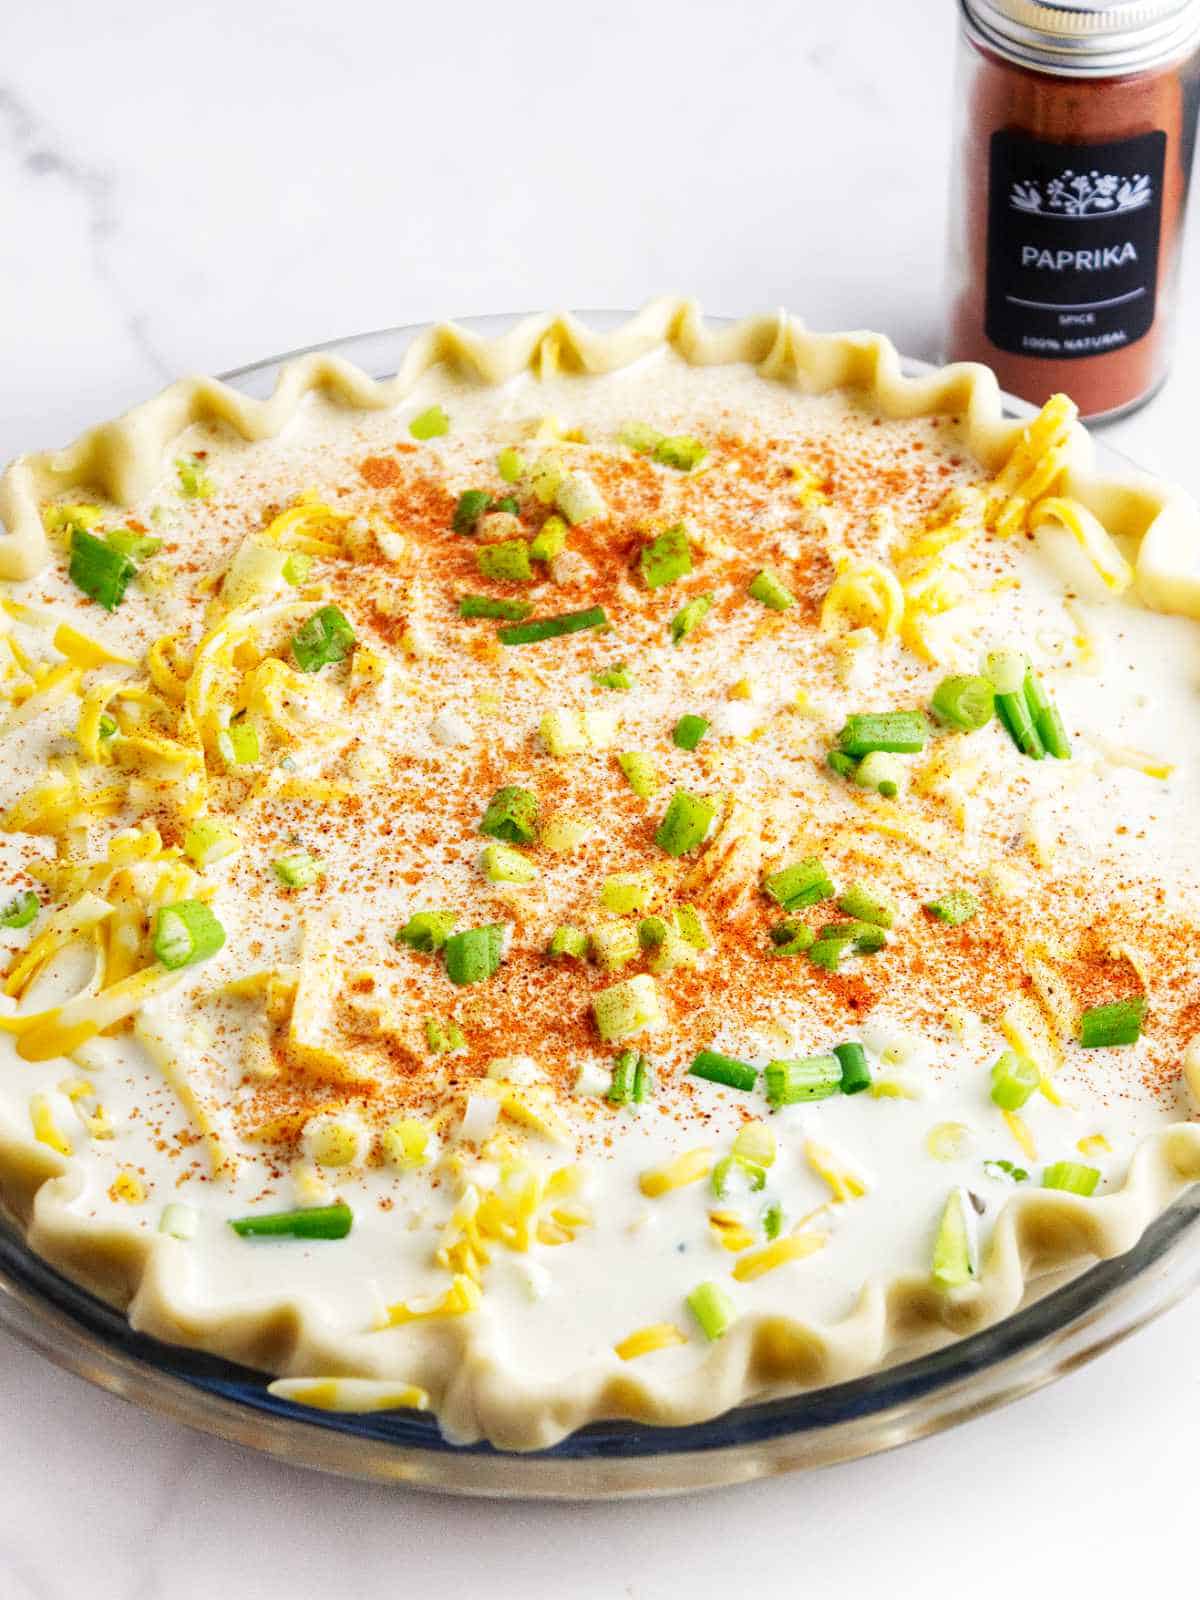 seasonings and green onions sprinkled on top of a pie.